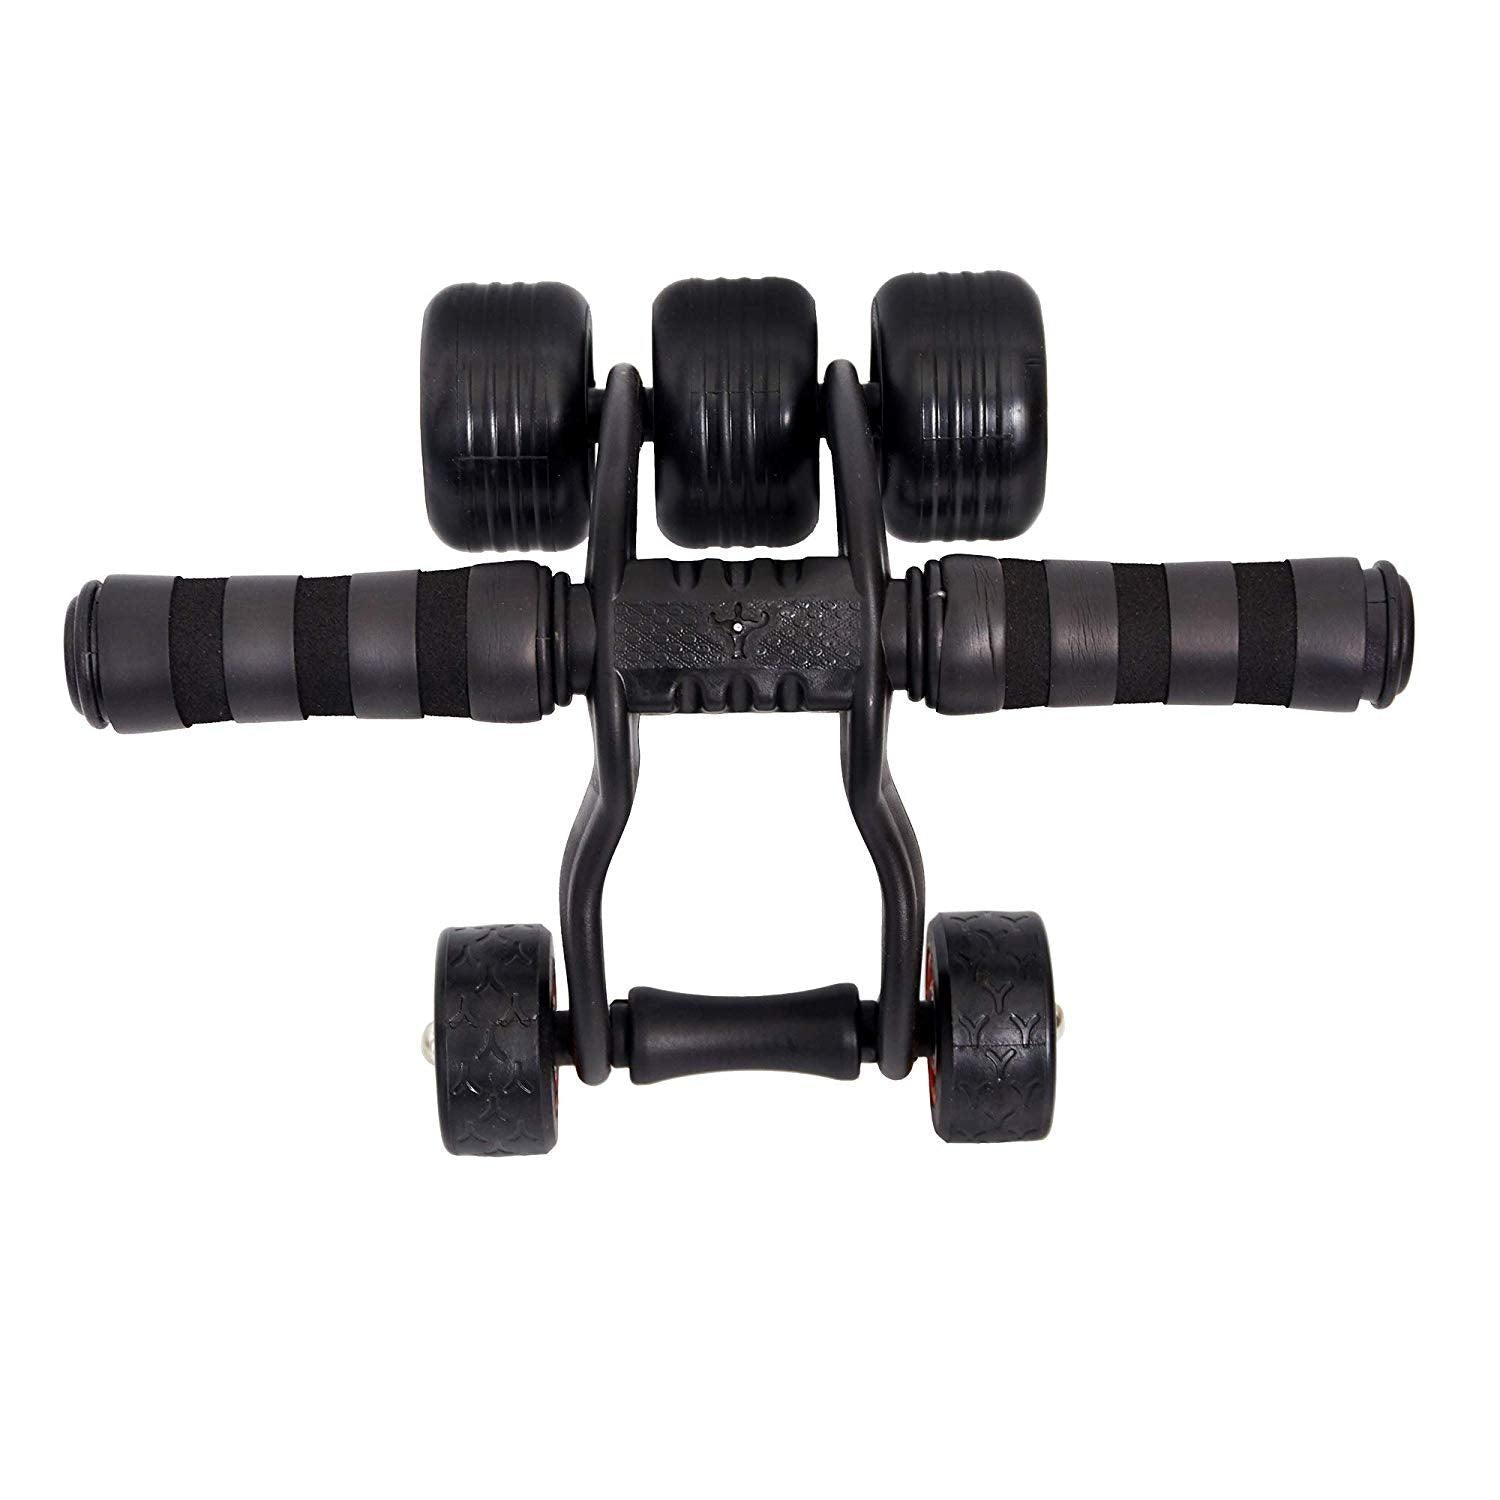 Bosonshop Black AB Wheel Roller with 5 Wheels for Home Gym